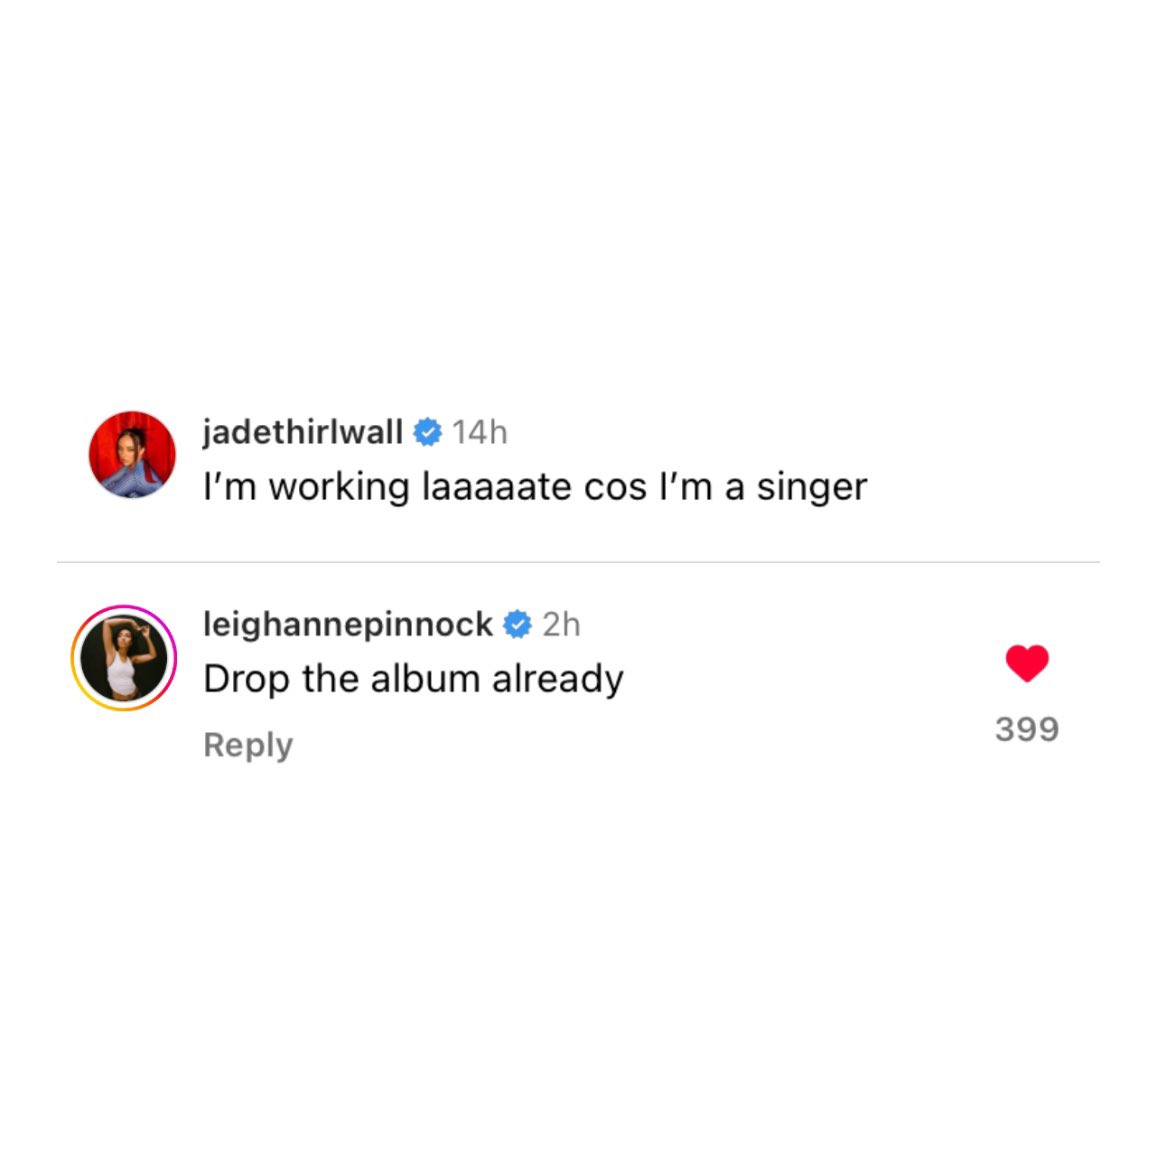 Leigh-Anne comments on Jade’s photo from the studio: “Drop the album already”